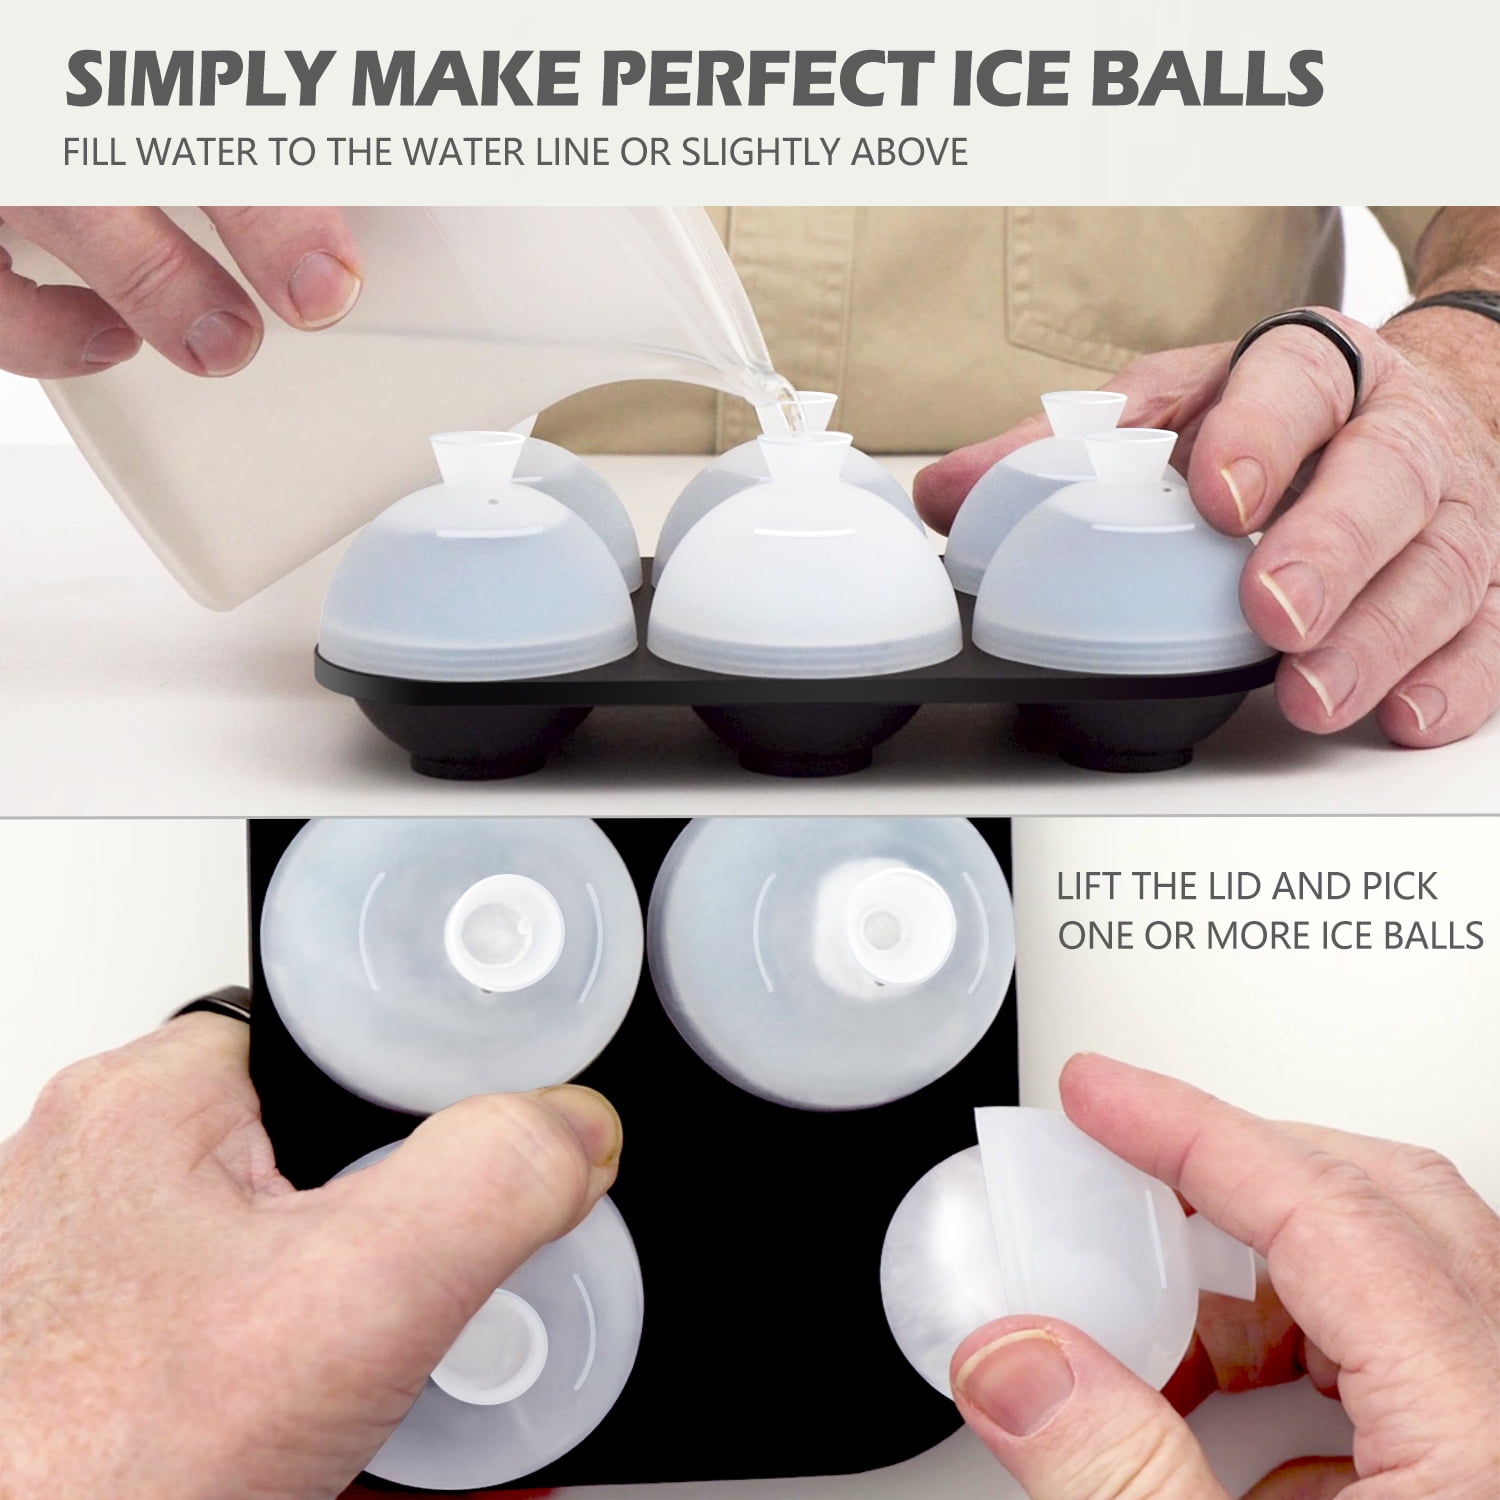 HONYAO Whiskey Cocktail Ice Mold, Silicone Round Sphere Ice Ball Maker Mold  Large Square Ice Cube Tray with Lid Easy Fill Easy Release - 6 Ice Balls +